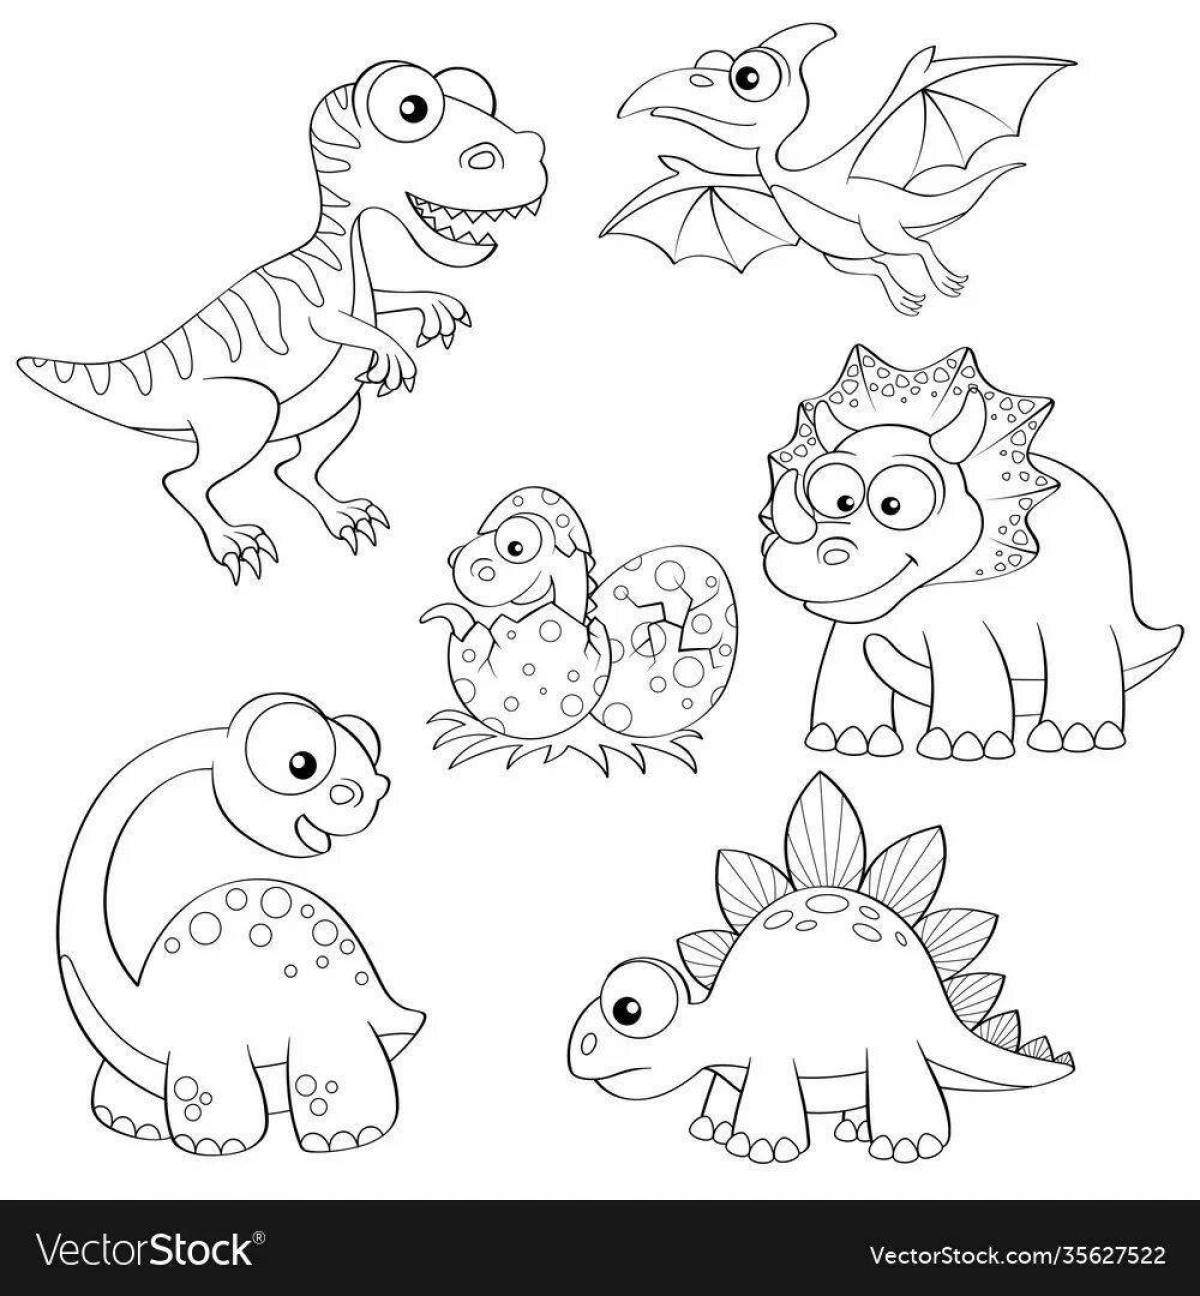 Fancy dinosaur coloring pages